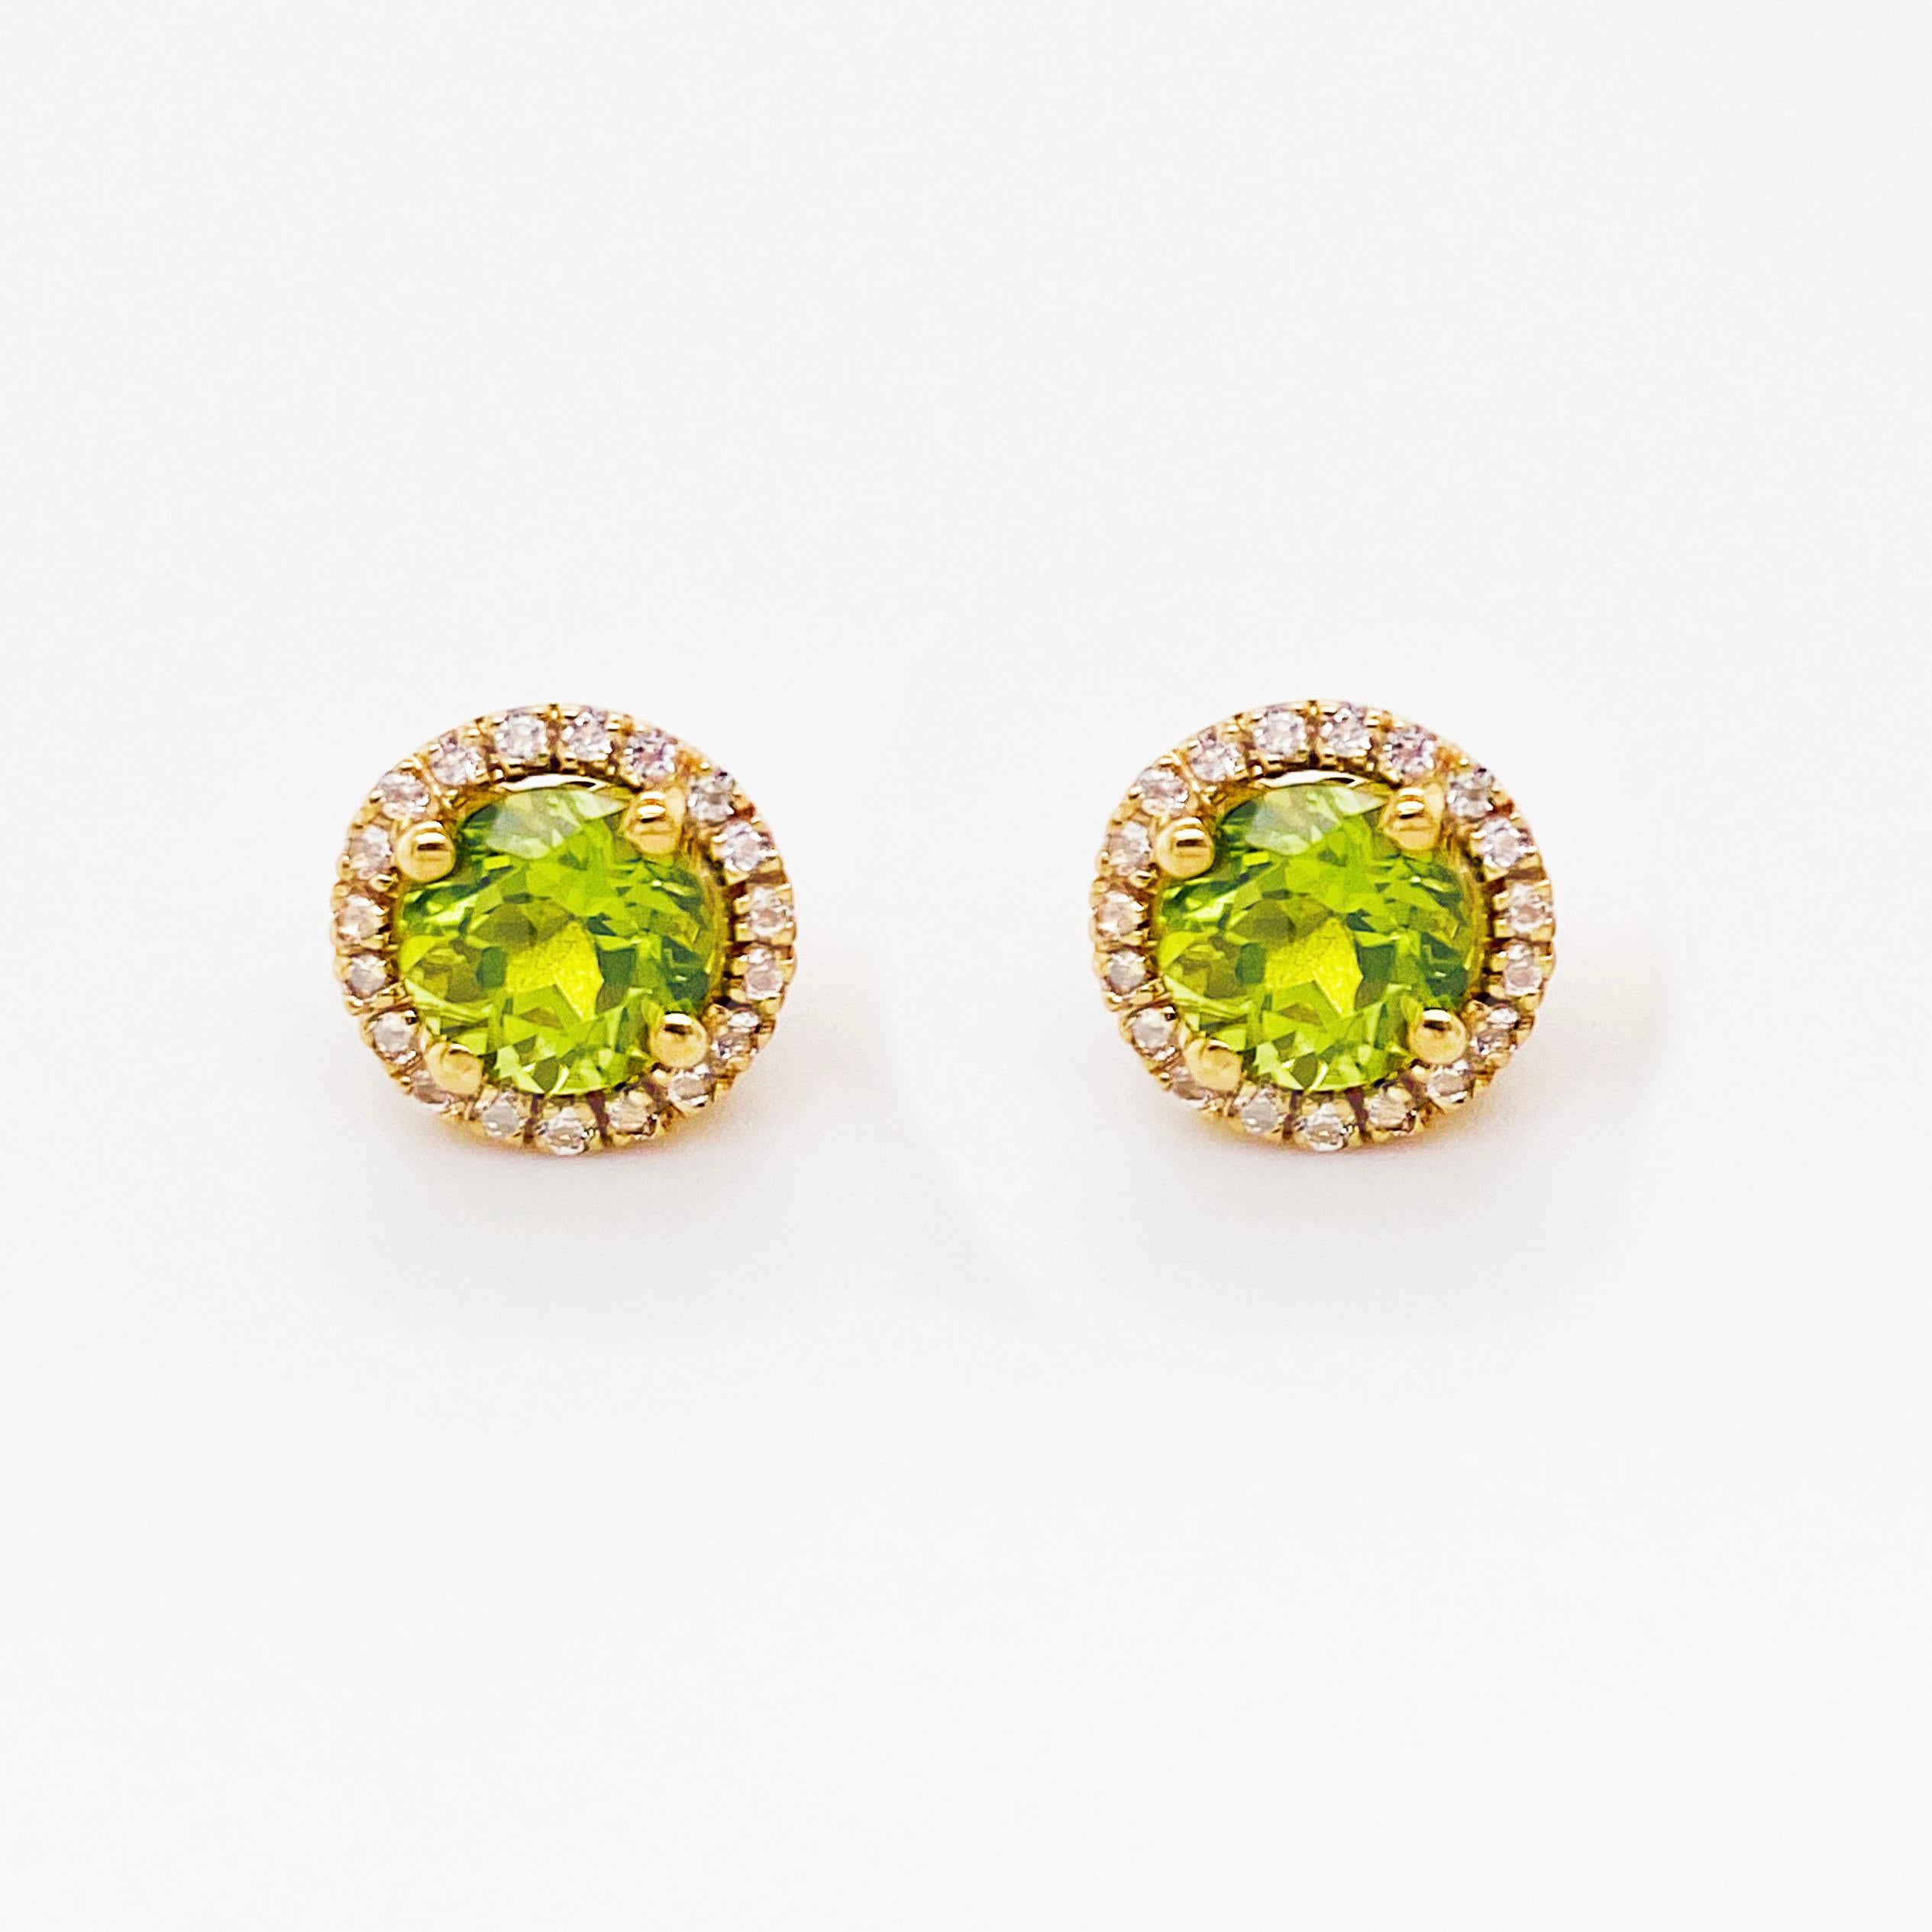 Round Cut Peridot & Topaz Earrings with White Topaz Halo Studs - 3 Carat Total Weight